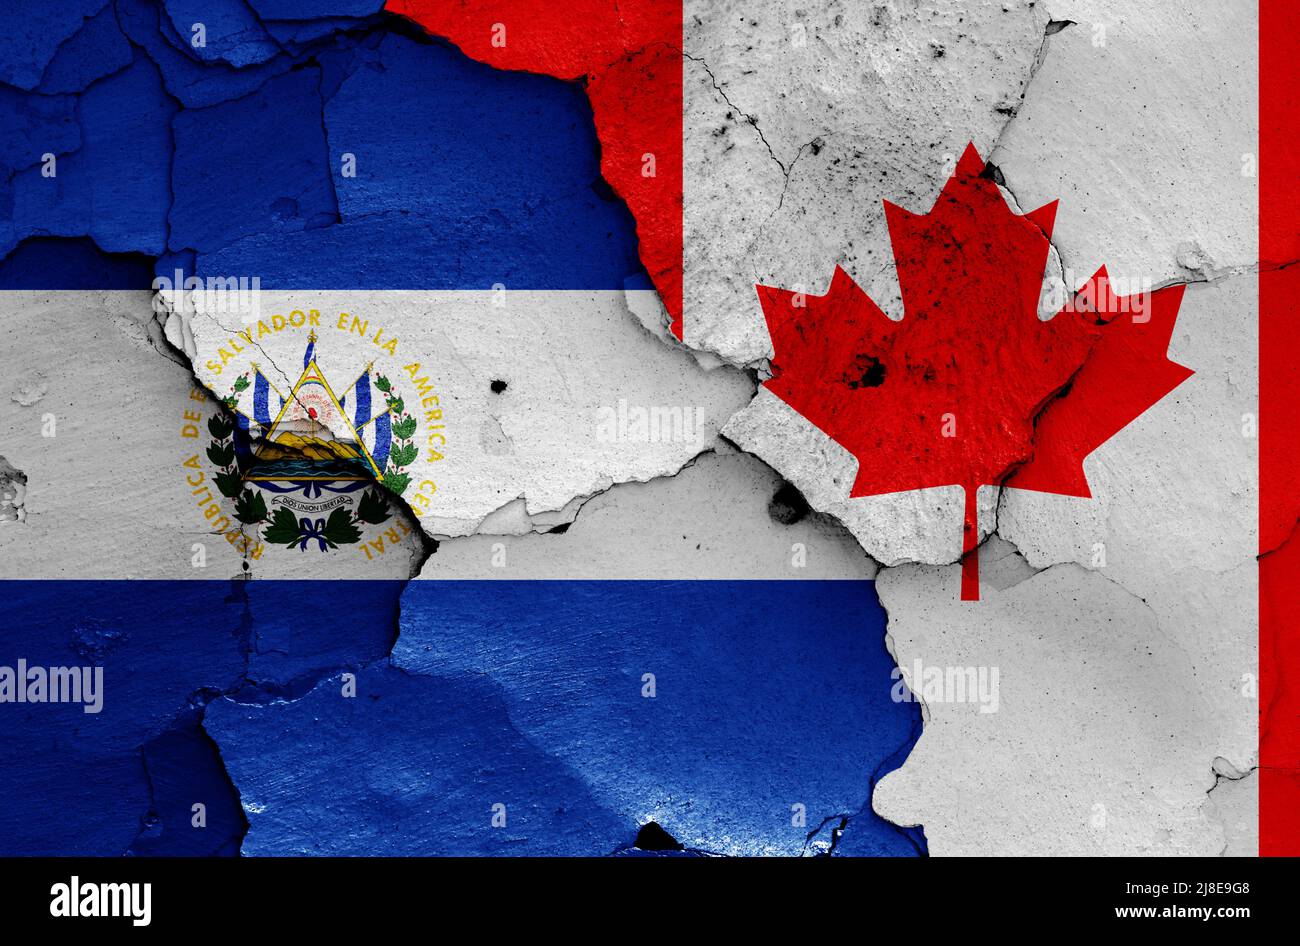 flags of El Salvador and Canada painted on cracked wall Stock Photo